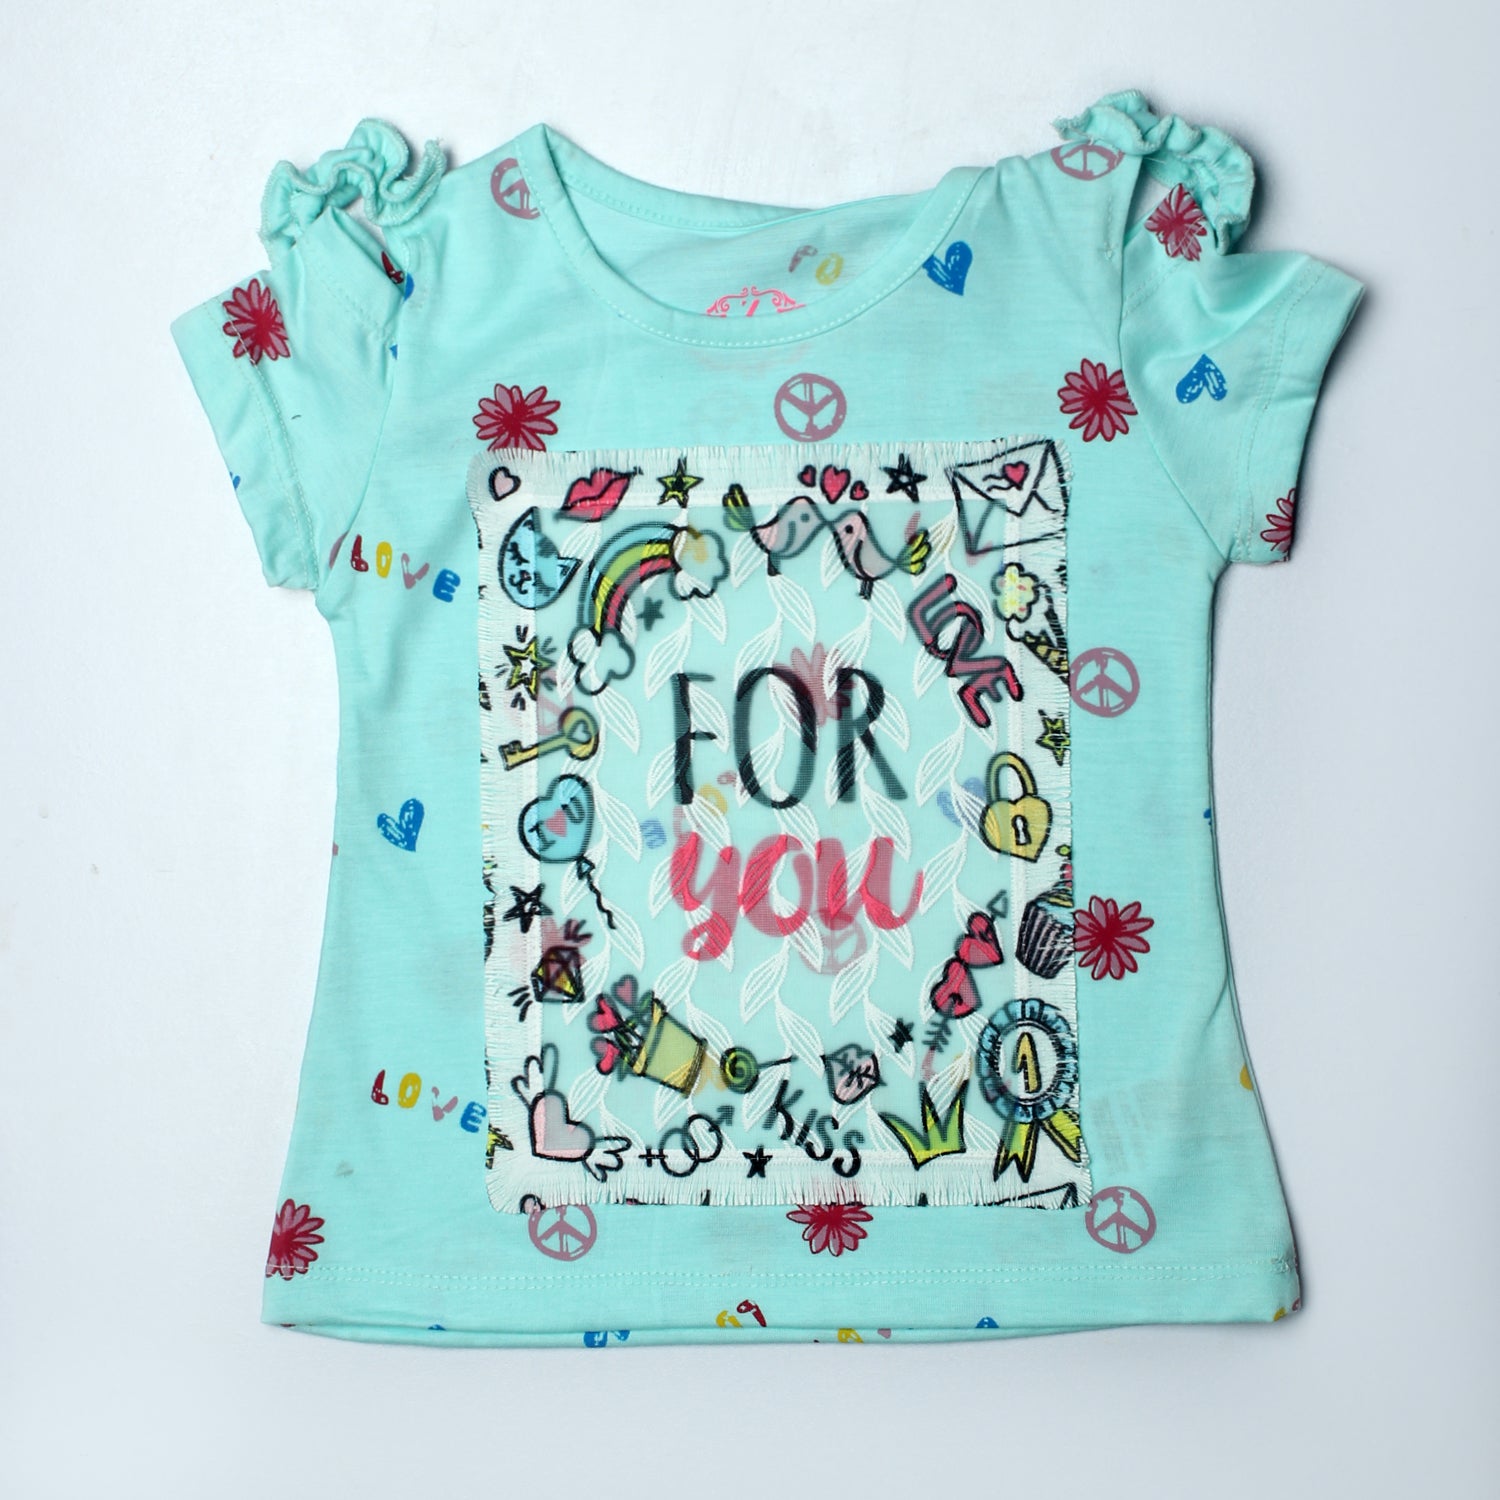 SKY BLUE LOVE FOR YOU PATCH T-SHIRT TOP FOR GIRLS - Expo City